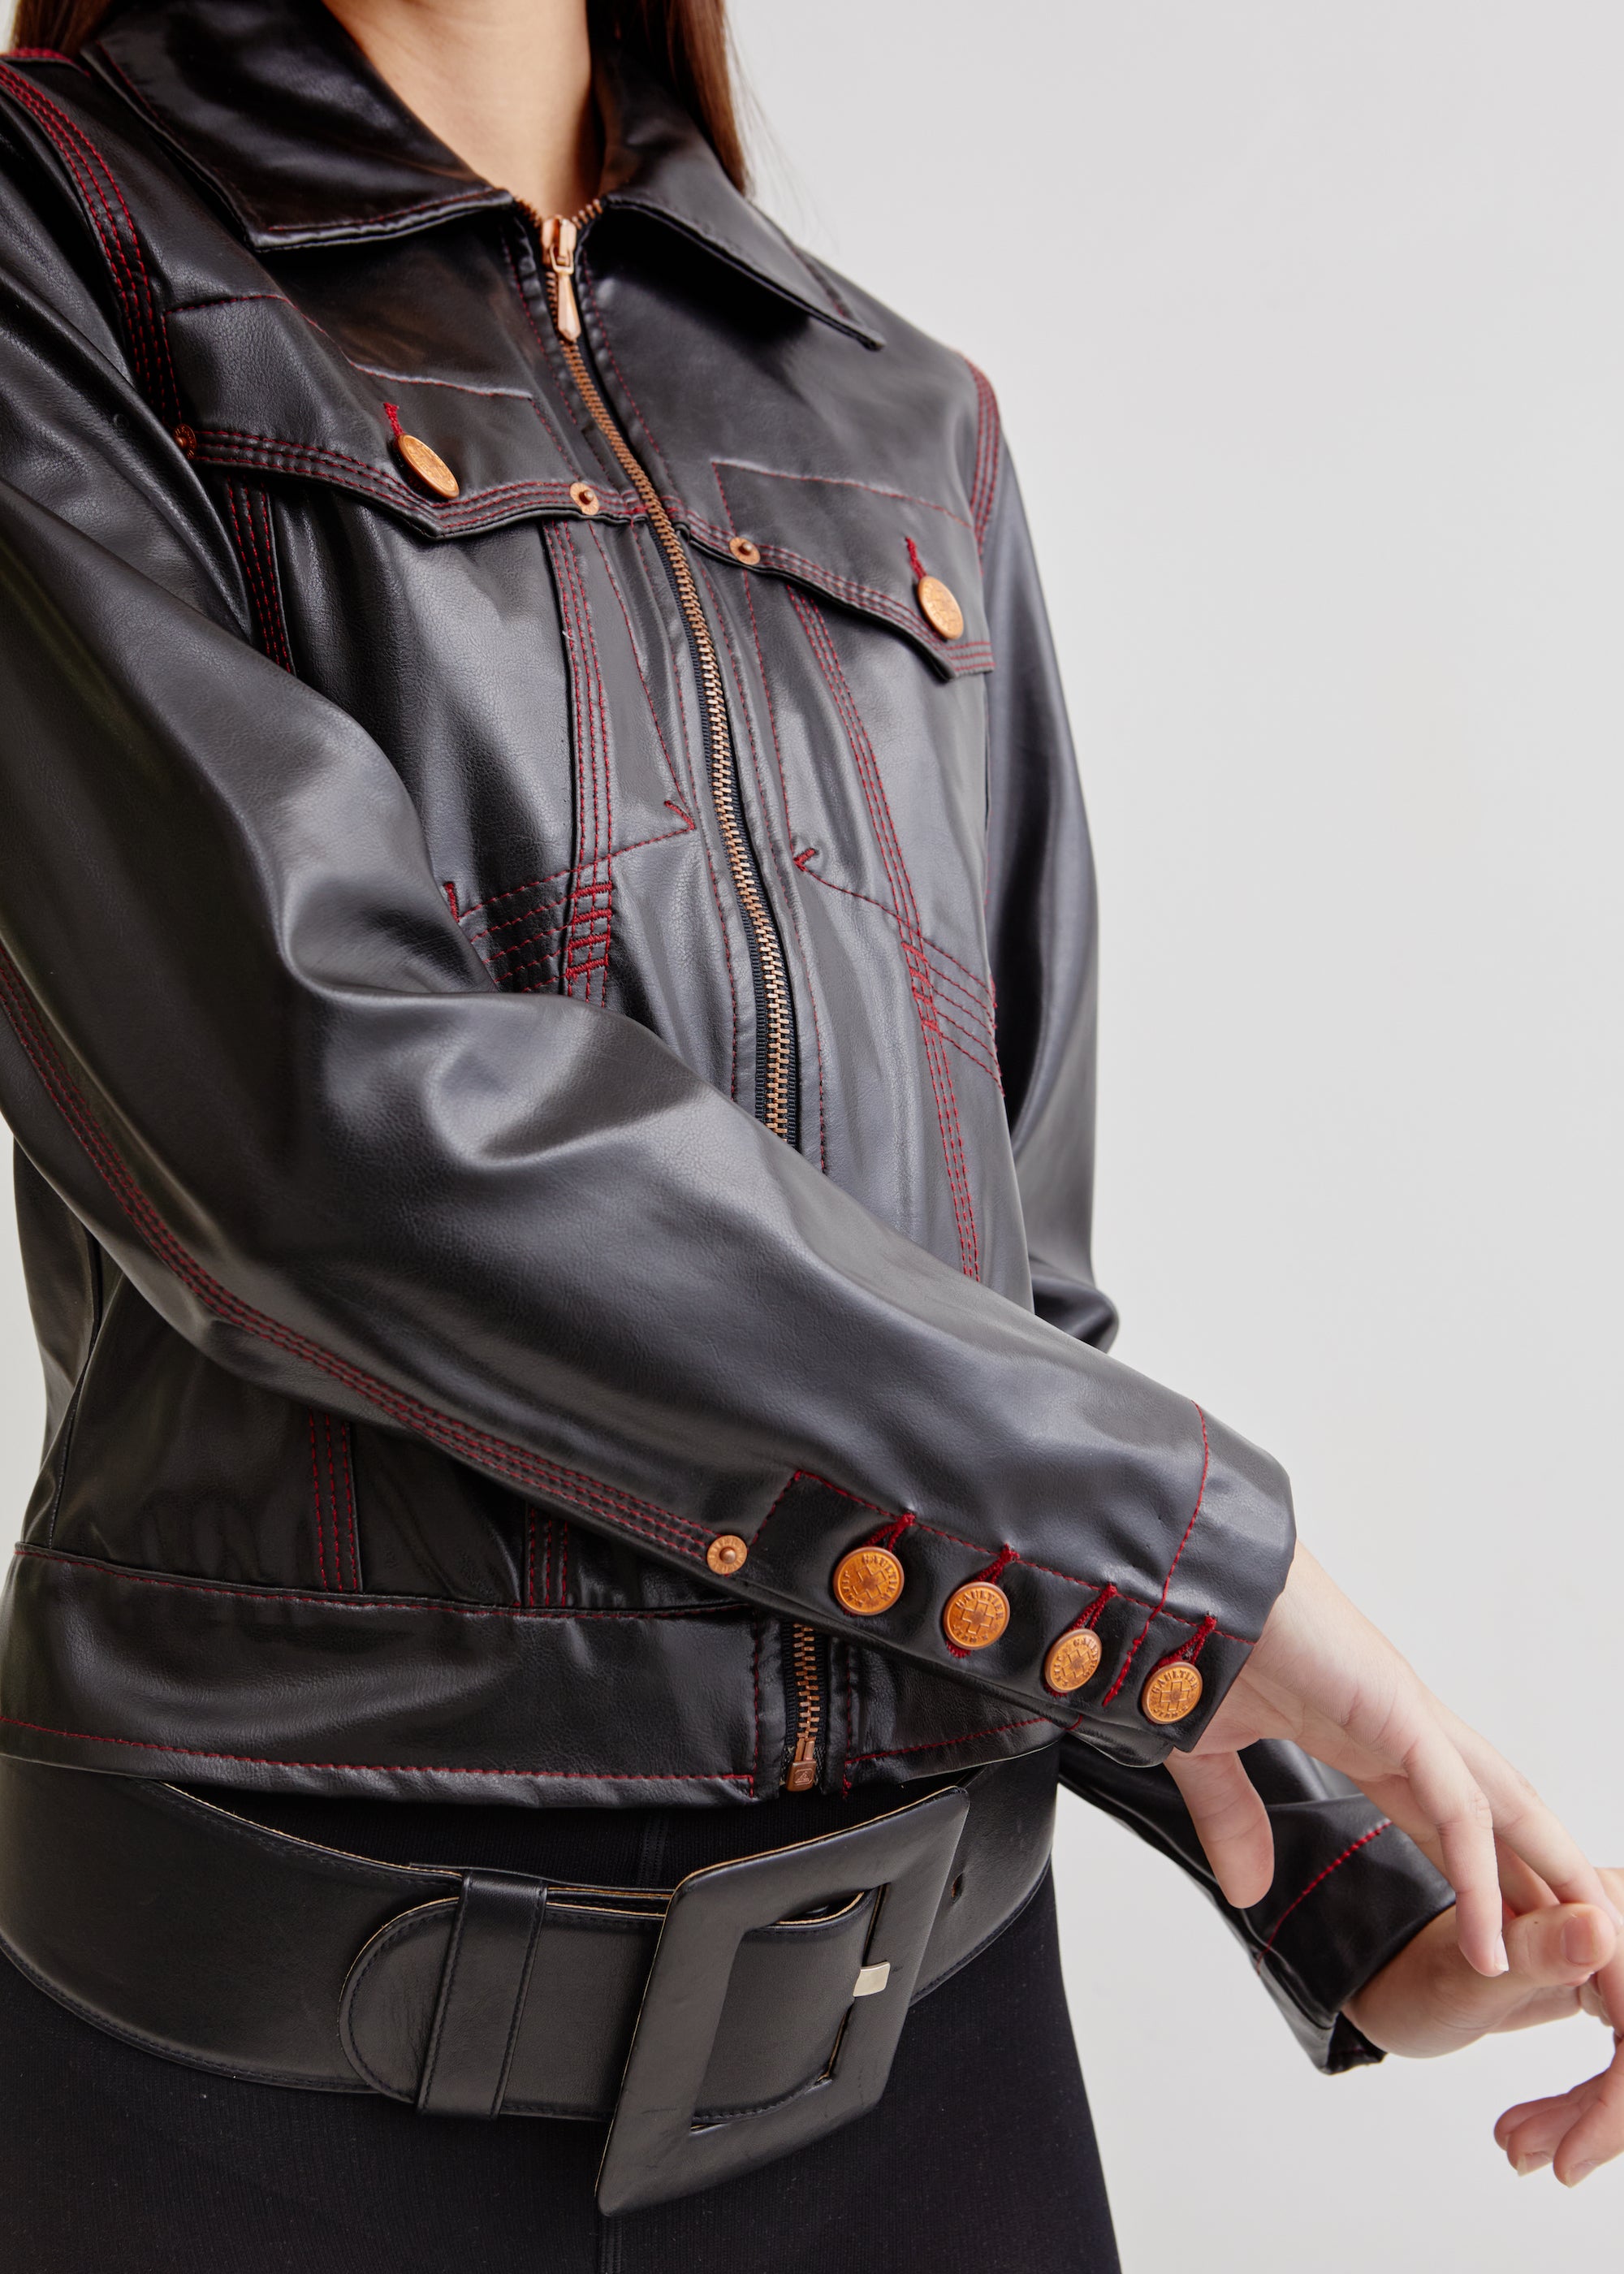 Jean Paul Gaultier <br> 90's PVC vegan leather overstitched jacket with brass logo buttons